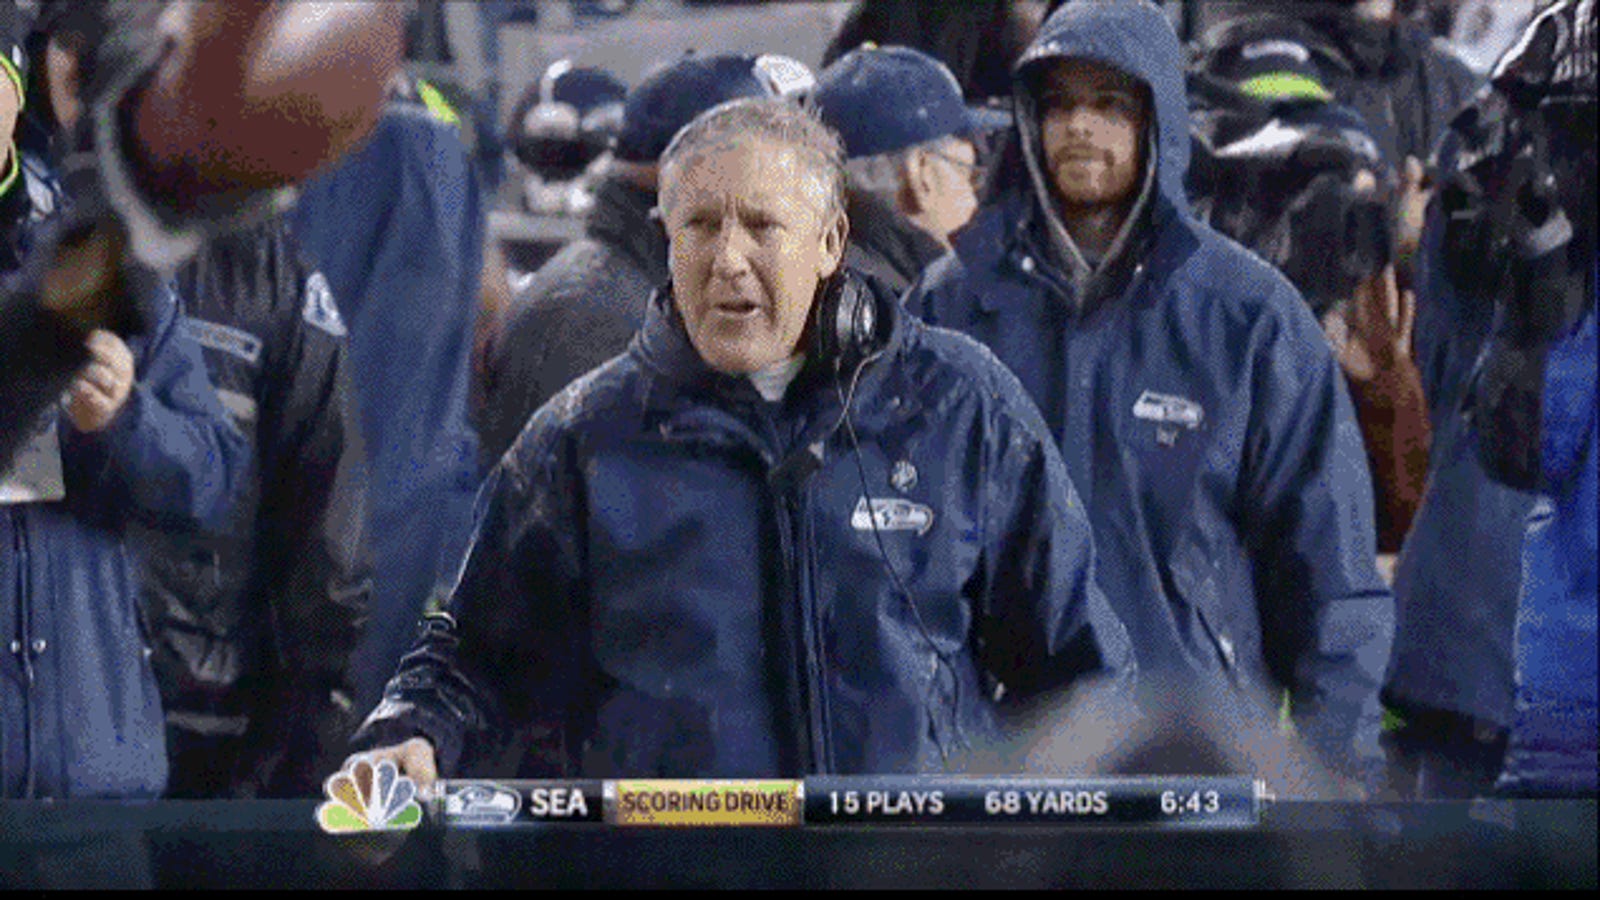 9/11 Truthers Love Pete Carroll